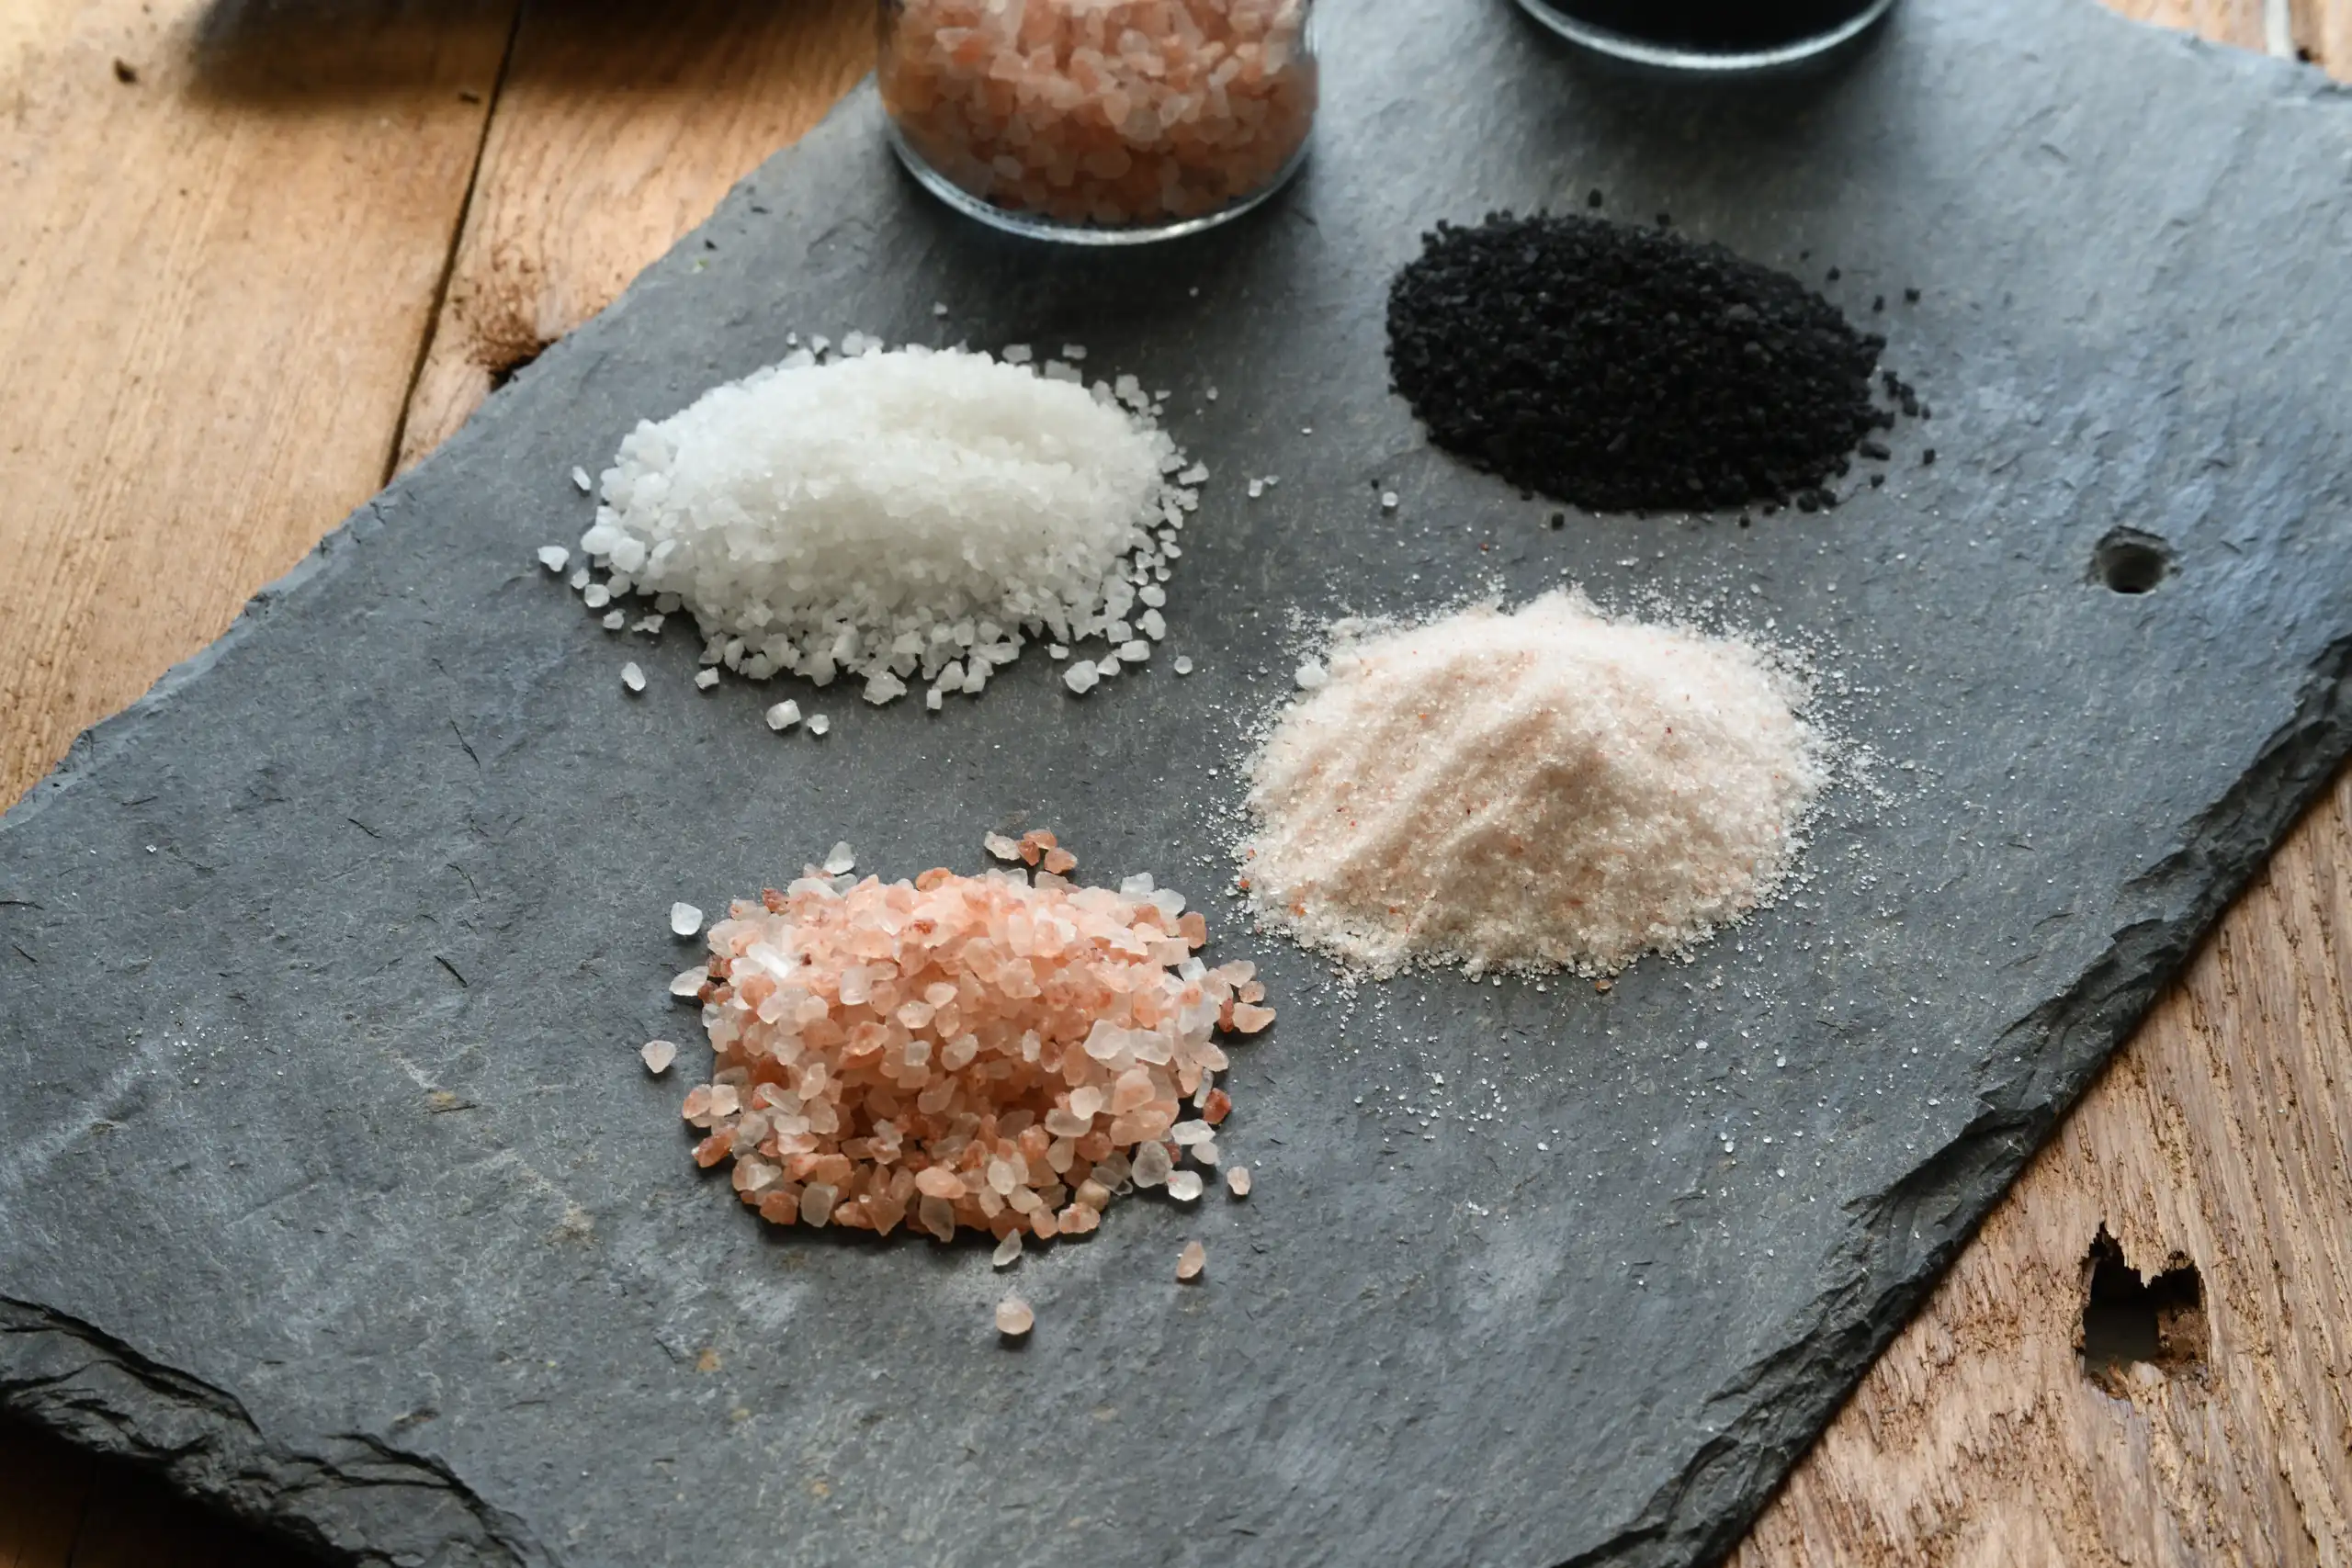 Photo showcasing different colors of Himalayan salt grains - pink, white, red, and black - highlighting their unique characteristics and culinary uses.